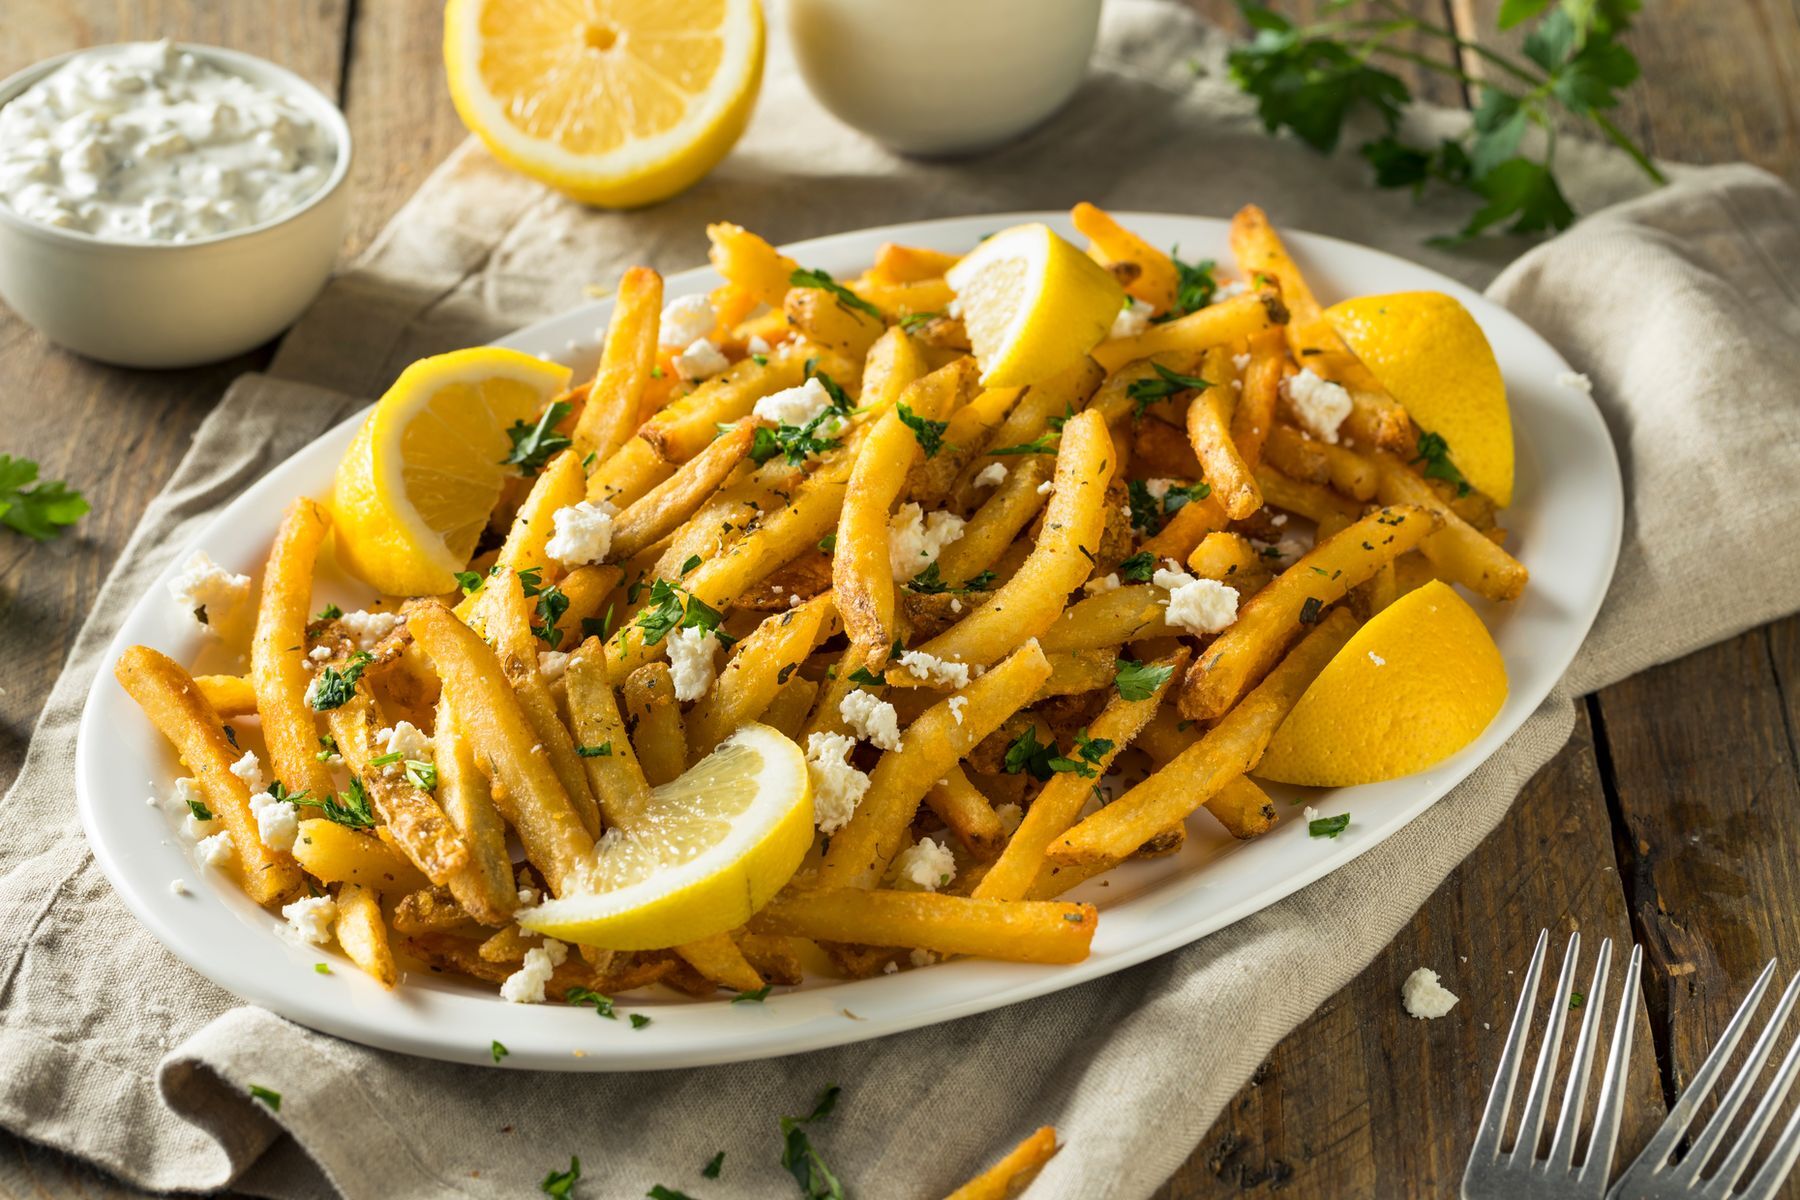 <p>Take a culinary journey with these Greek-inspired fries, better known as <a href="https://www.olivetomato.com/authentic-greek-olive-oil-fries-patates-tiganites/" rel="noreferrer noopener">patates tiganites</a>, made with feta cheese, parsley, and lemon. Serve with a tzatziki-style dip.</p>